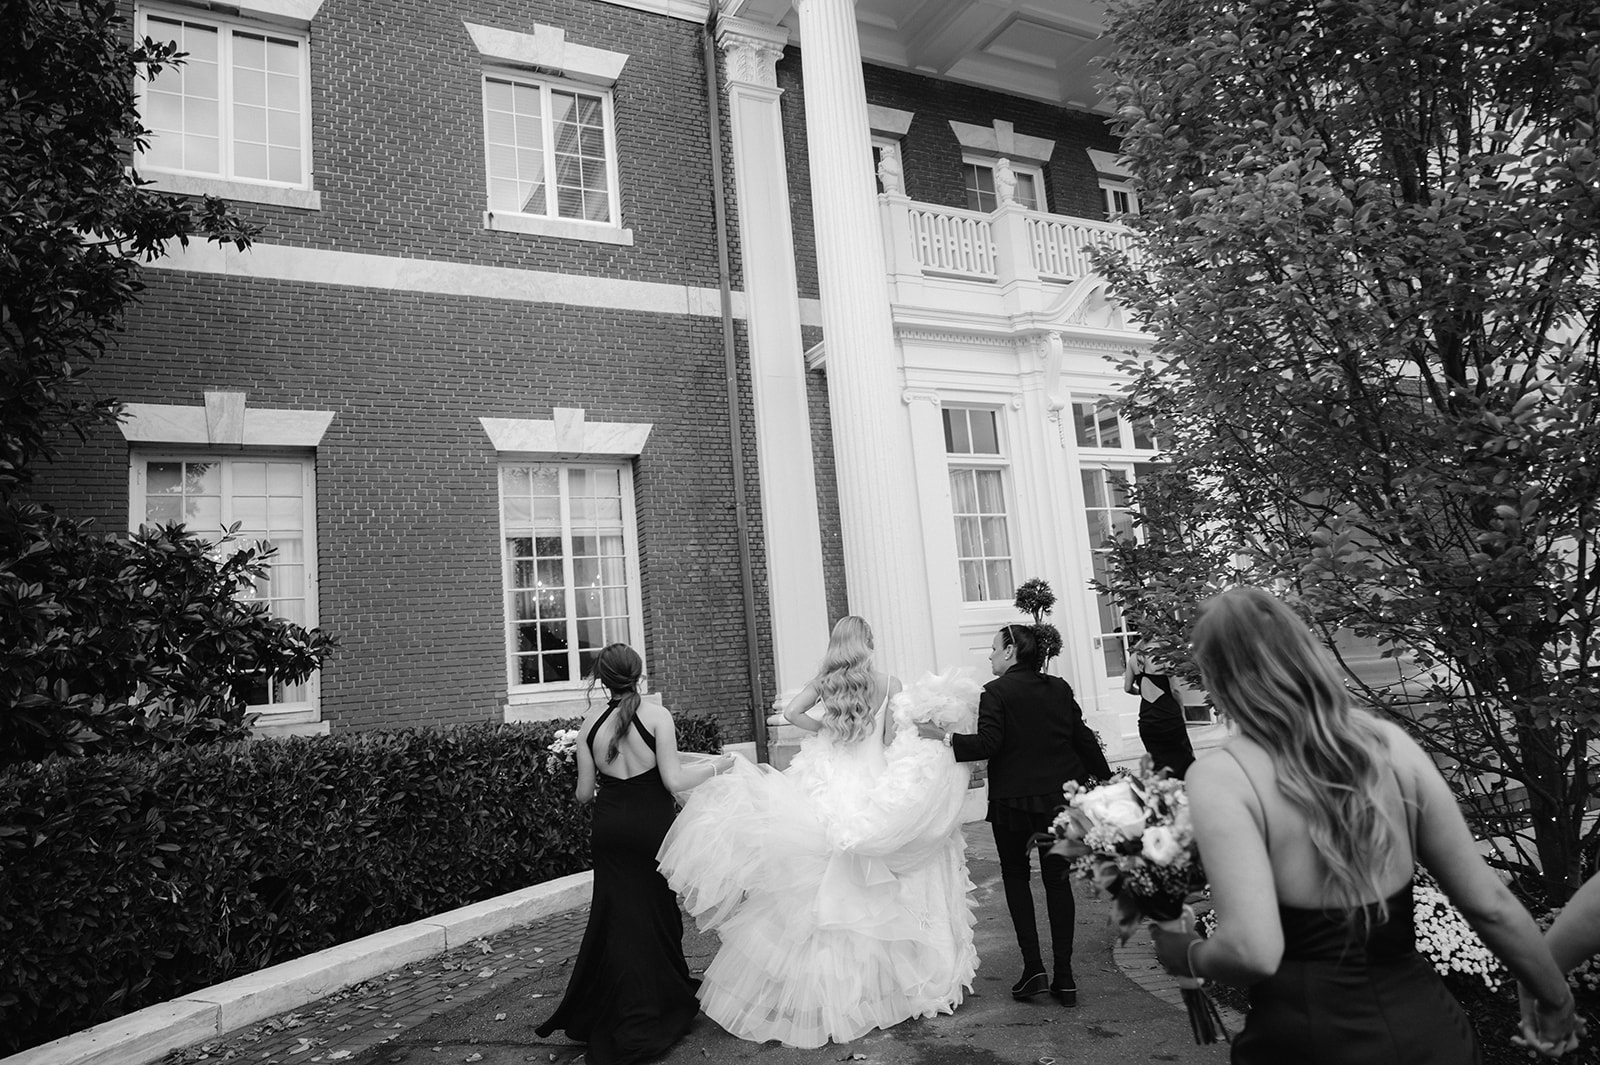 Bride and bridesmaids walking into the Bourne Mansion.